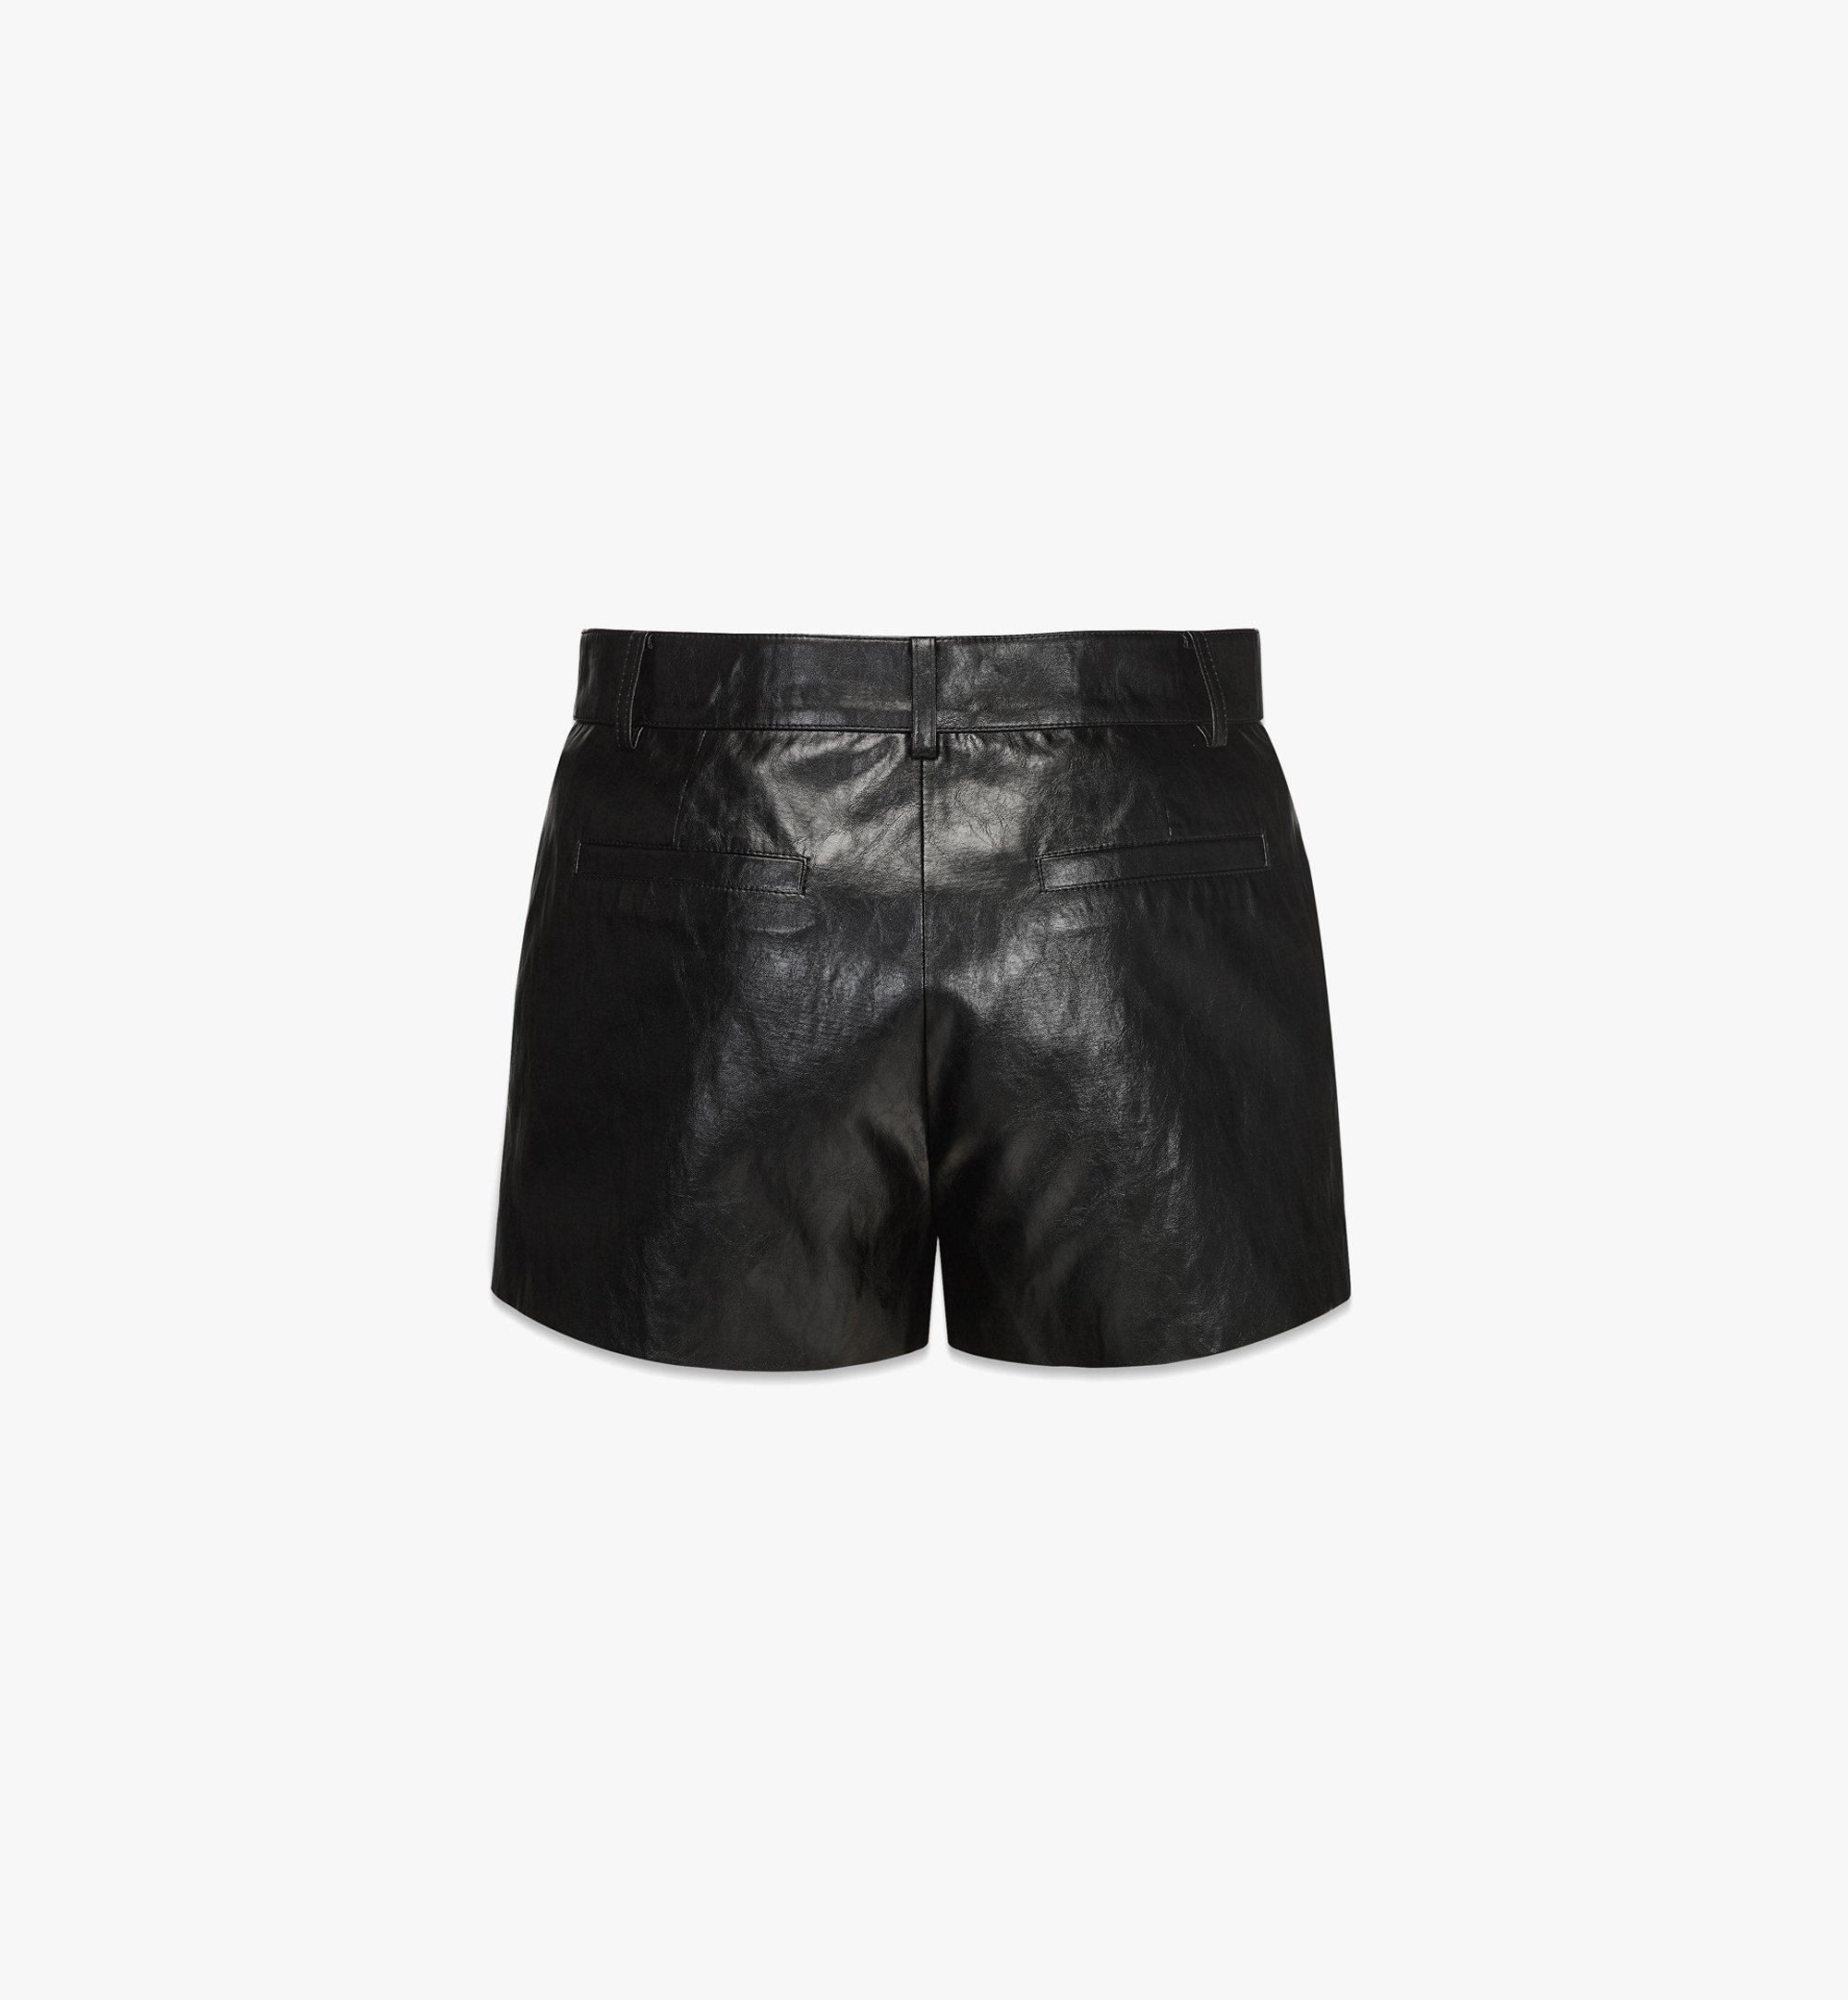 MCM Women’s Shorts in Crushed Faux Leather Black MFPDSMM02BK00M Alternate View 1